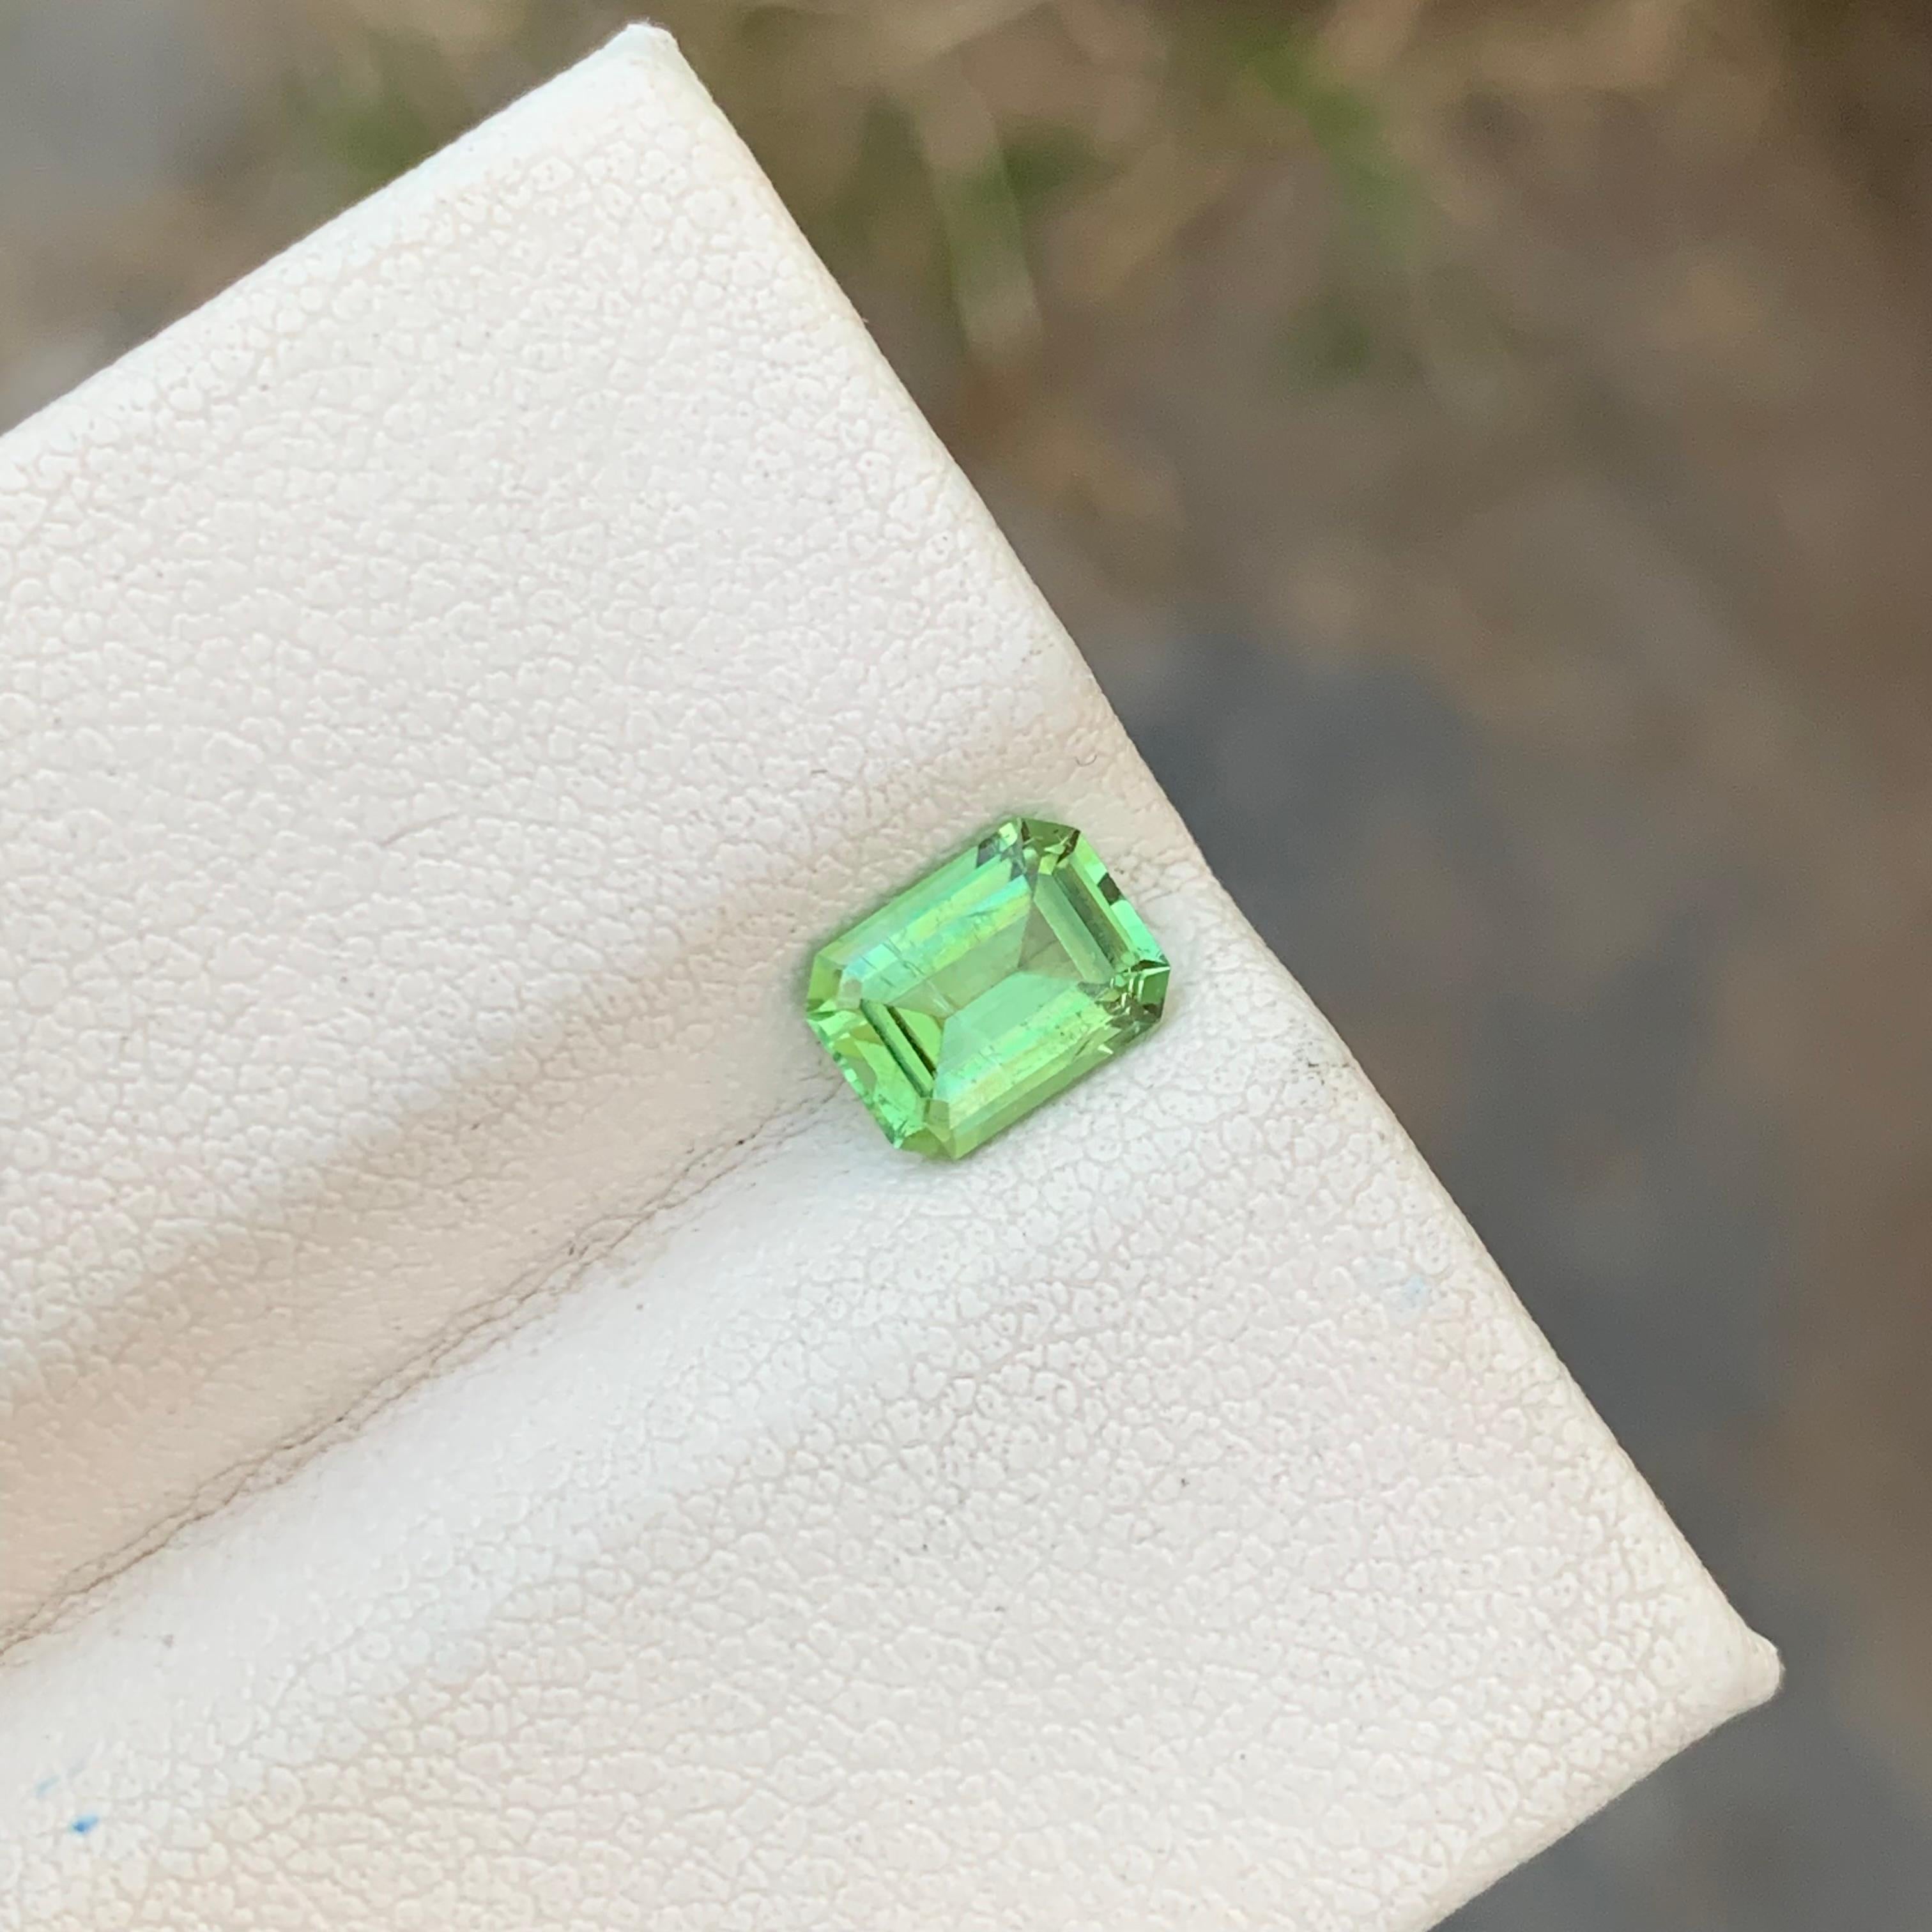 Loose Green Tourmaline
Weight: 1.00 Carats
Dimension: 7 x 5.2 x 3.5 Mm
Colour: Green 
Origin: Afghanistan
Certificate: On Demand
Treatment: Non

Tourmaline is a captivating gemstone known for its remarkable variety of colors, making it a favorite